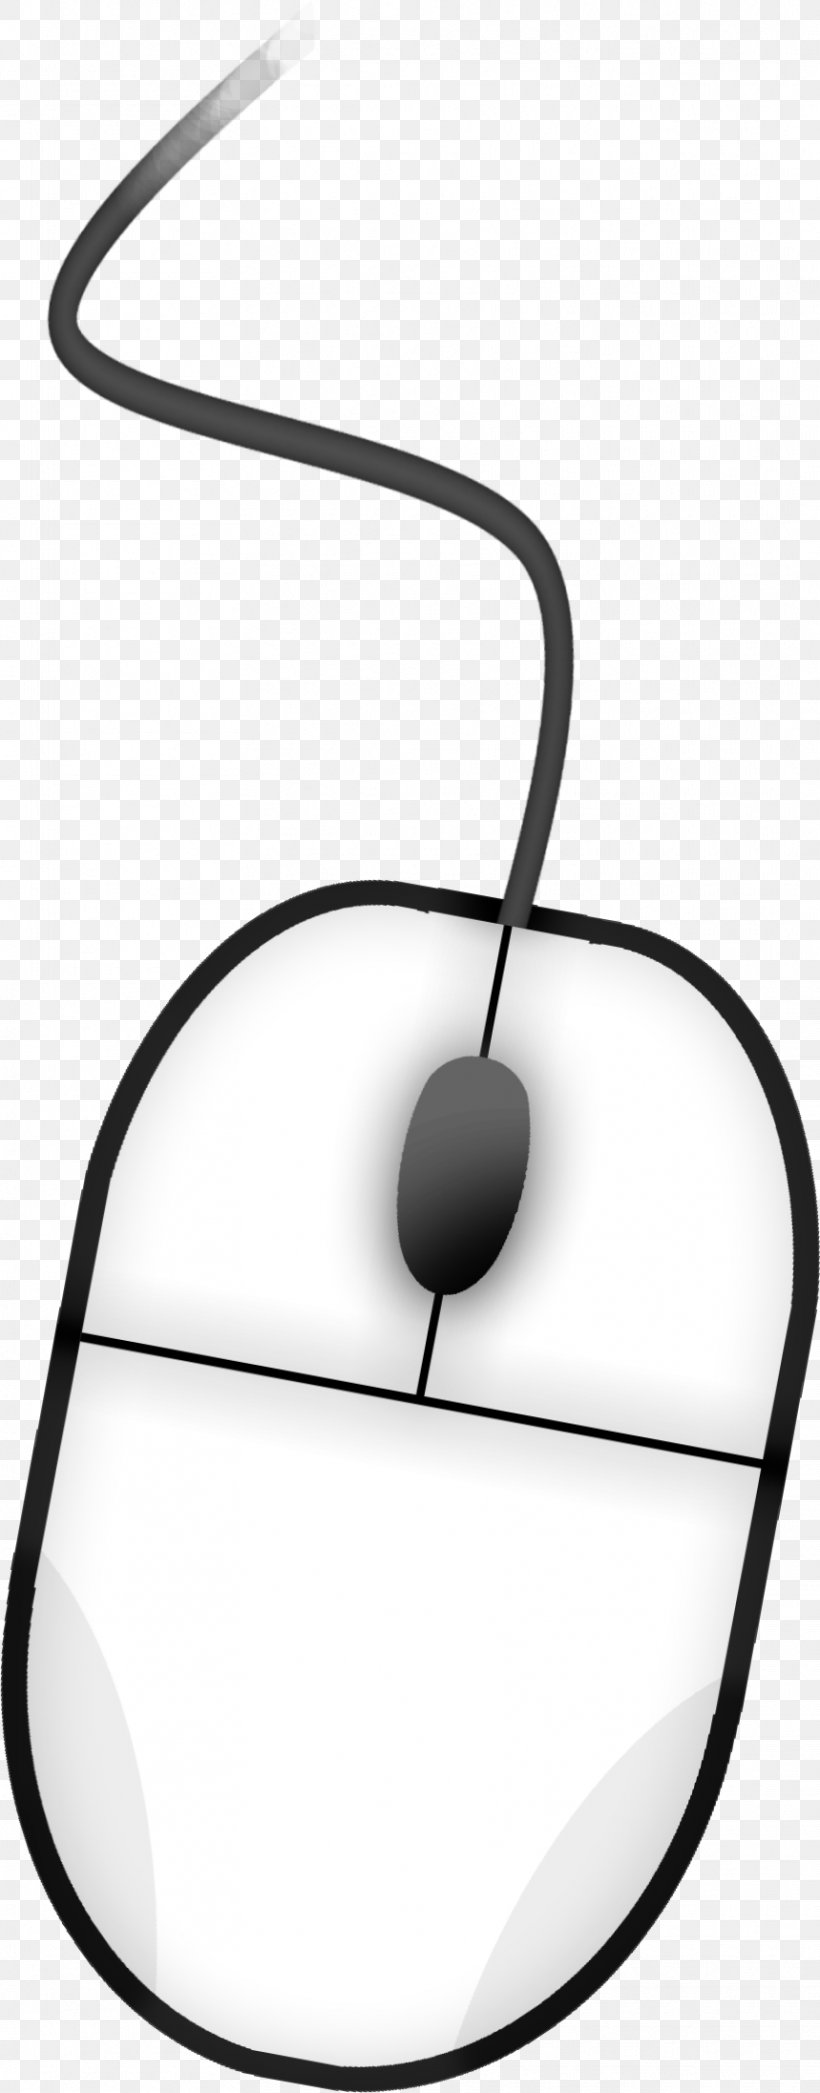 Computer Mouse Clip Art, PNG, 859x2193px, Computer Mouse, Black And White, Computer, Computer Monitors, Monochrome Photography Download Free